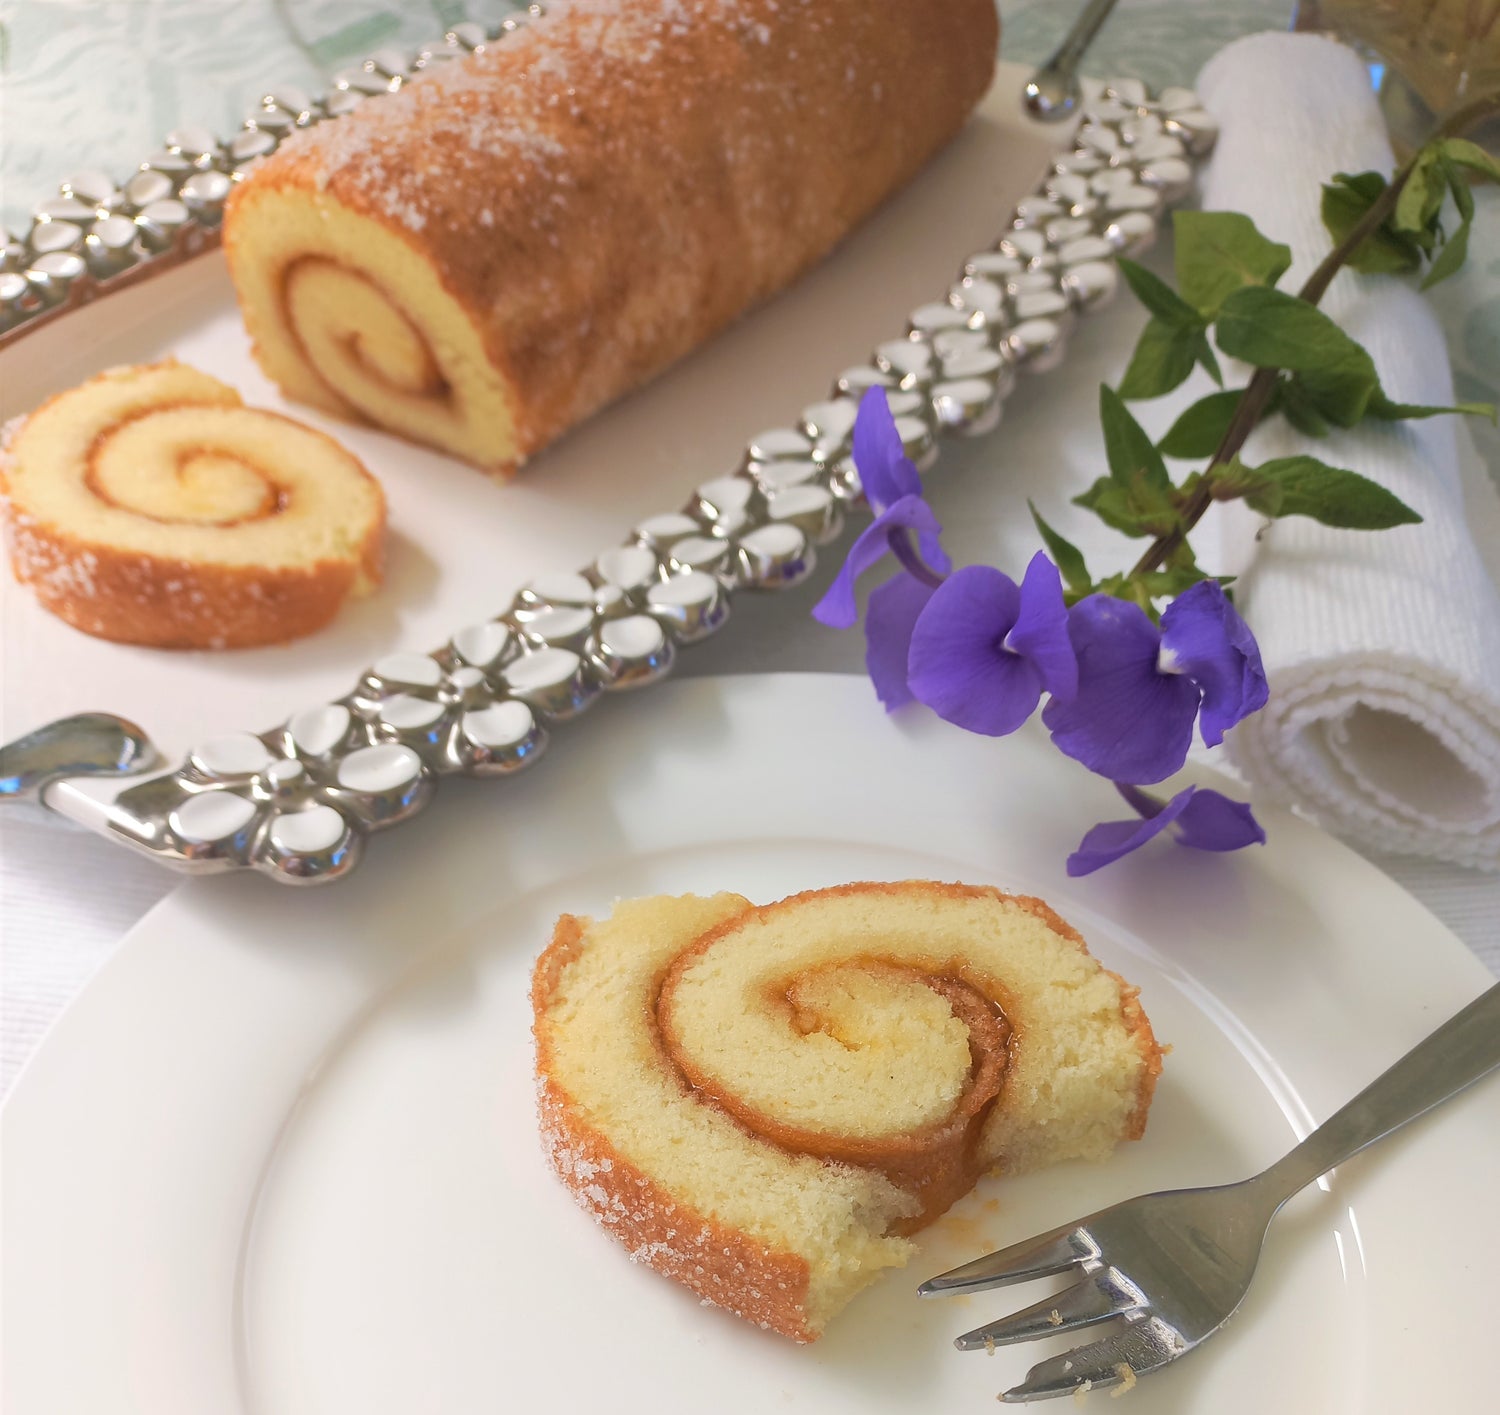 Coleman Royal Bakeries Gluten-free Plain Flour is certified gluten-free.   It is a cup for cup replacement flour.  In the picture, gluten-free and dairy-free Swiss Roll have been made.